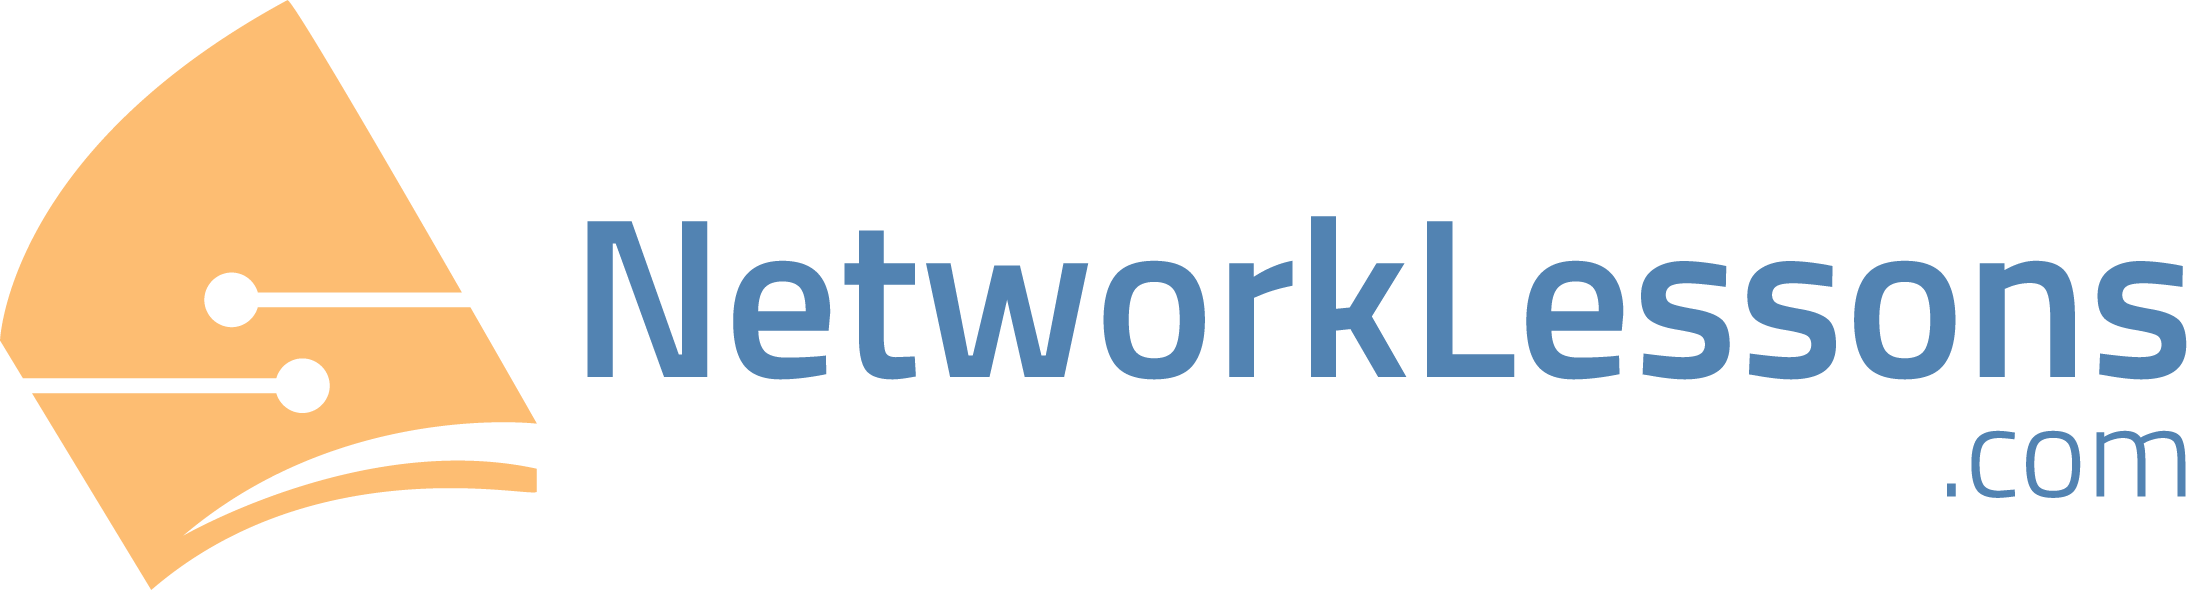 networklessons_logo_transparent_background.png|400x107